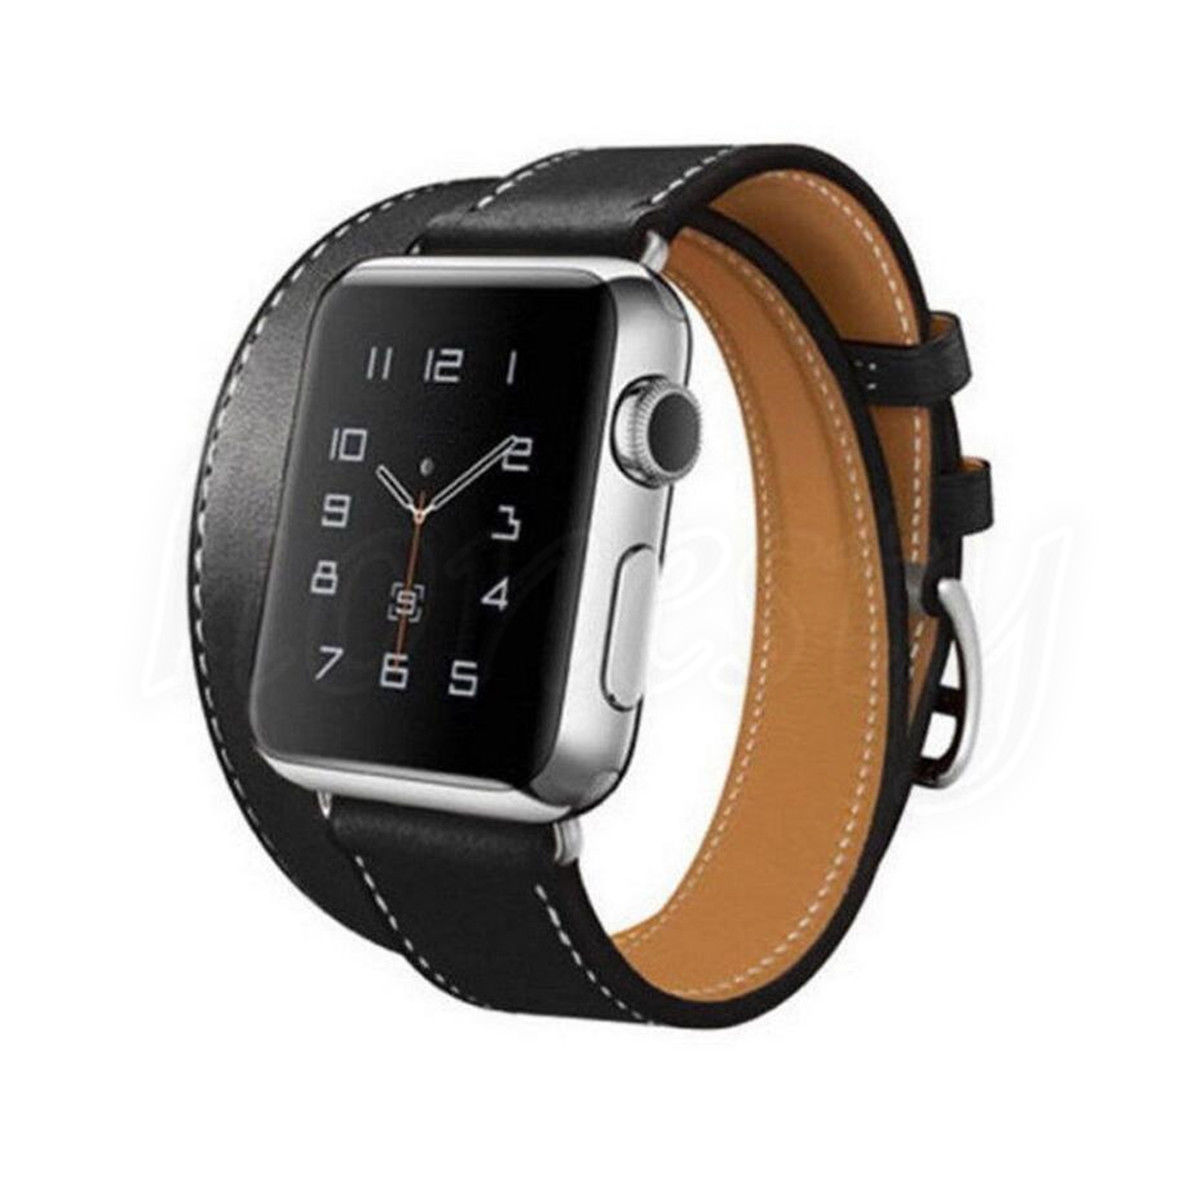 Genuine-Leather-Watch-Band-Strap-Replacement-For-Apple-Watch-Series-1-42mm-1306681-1